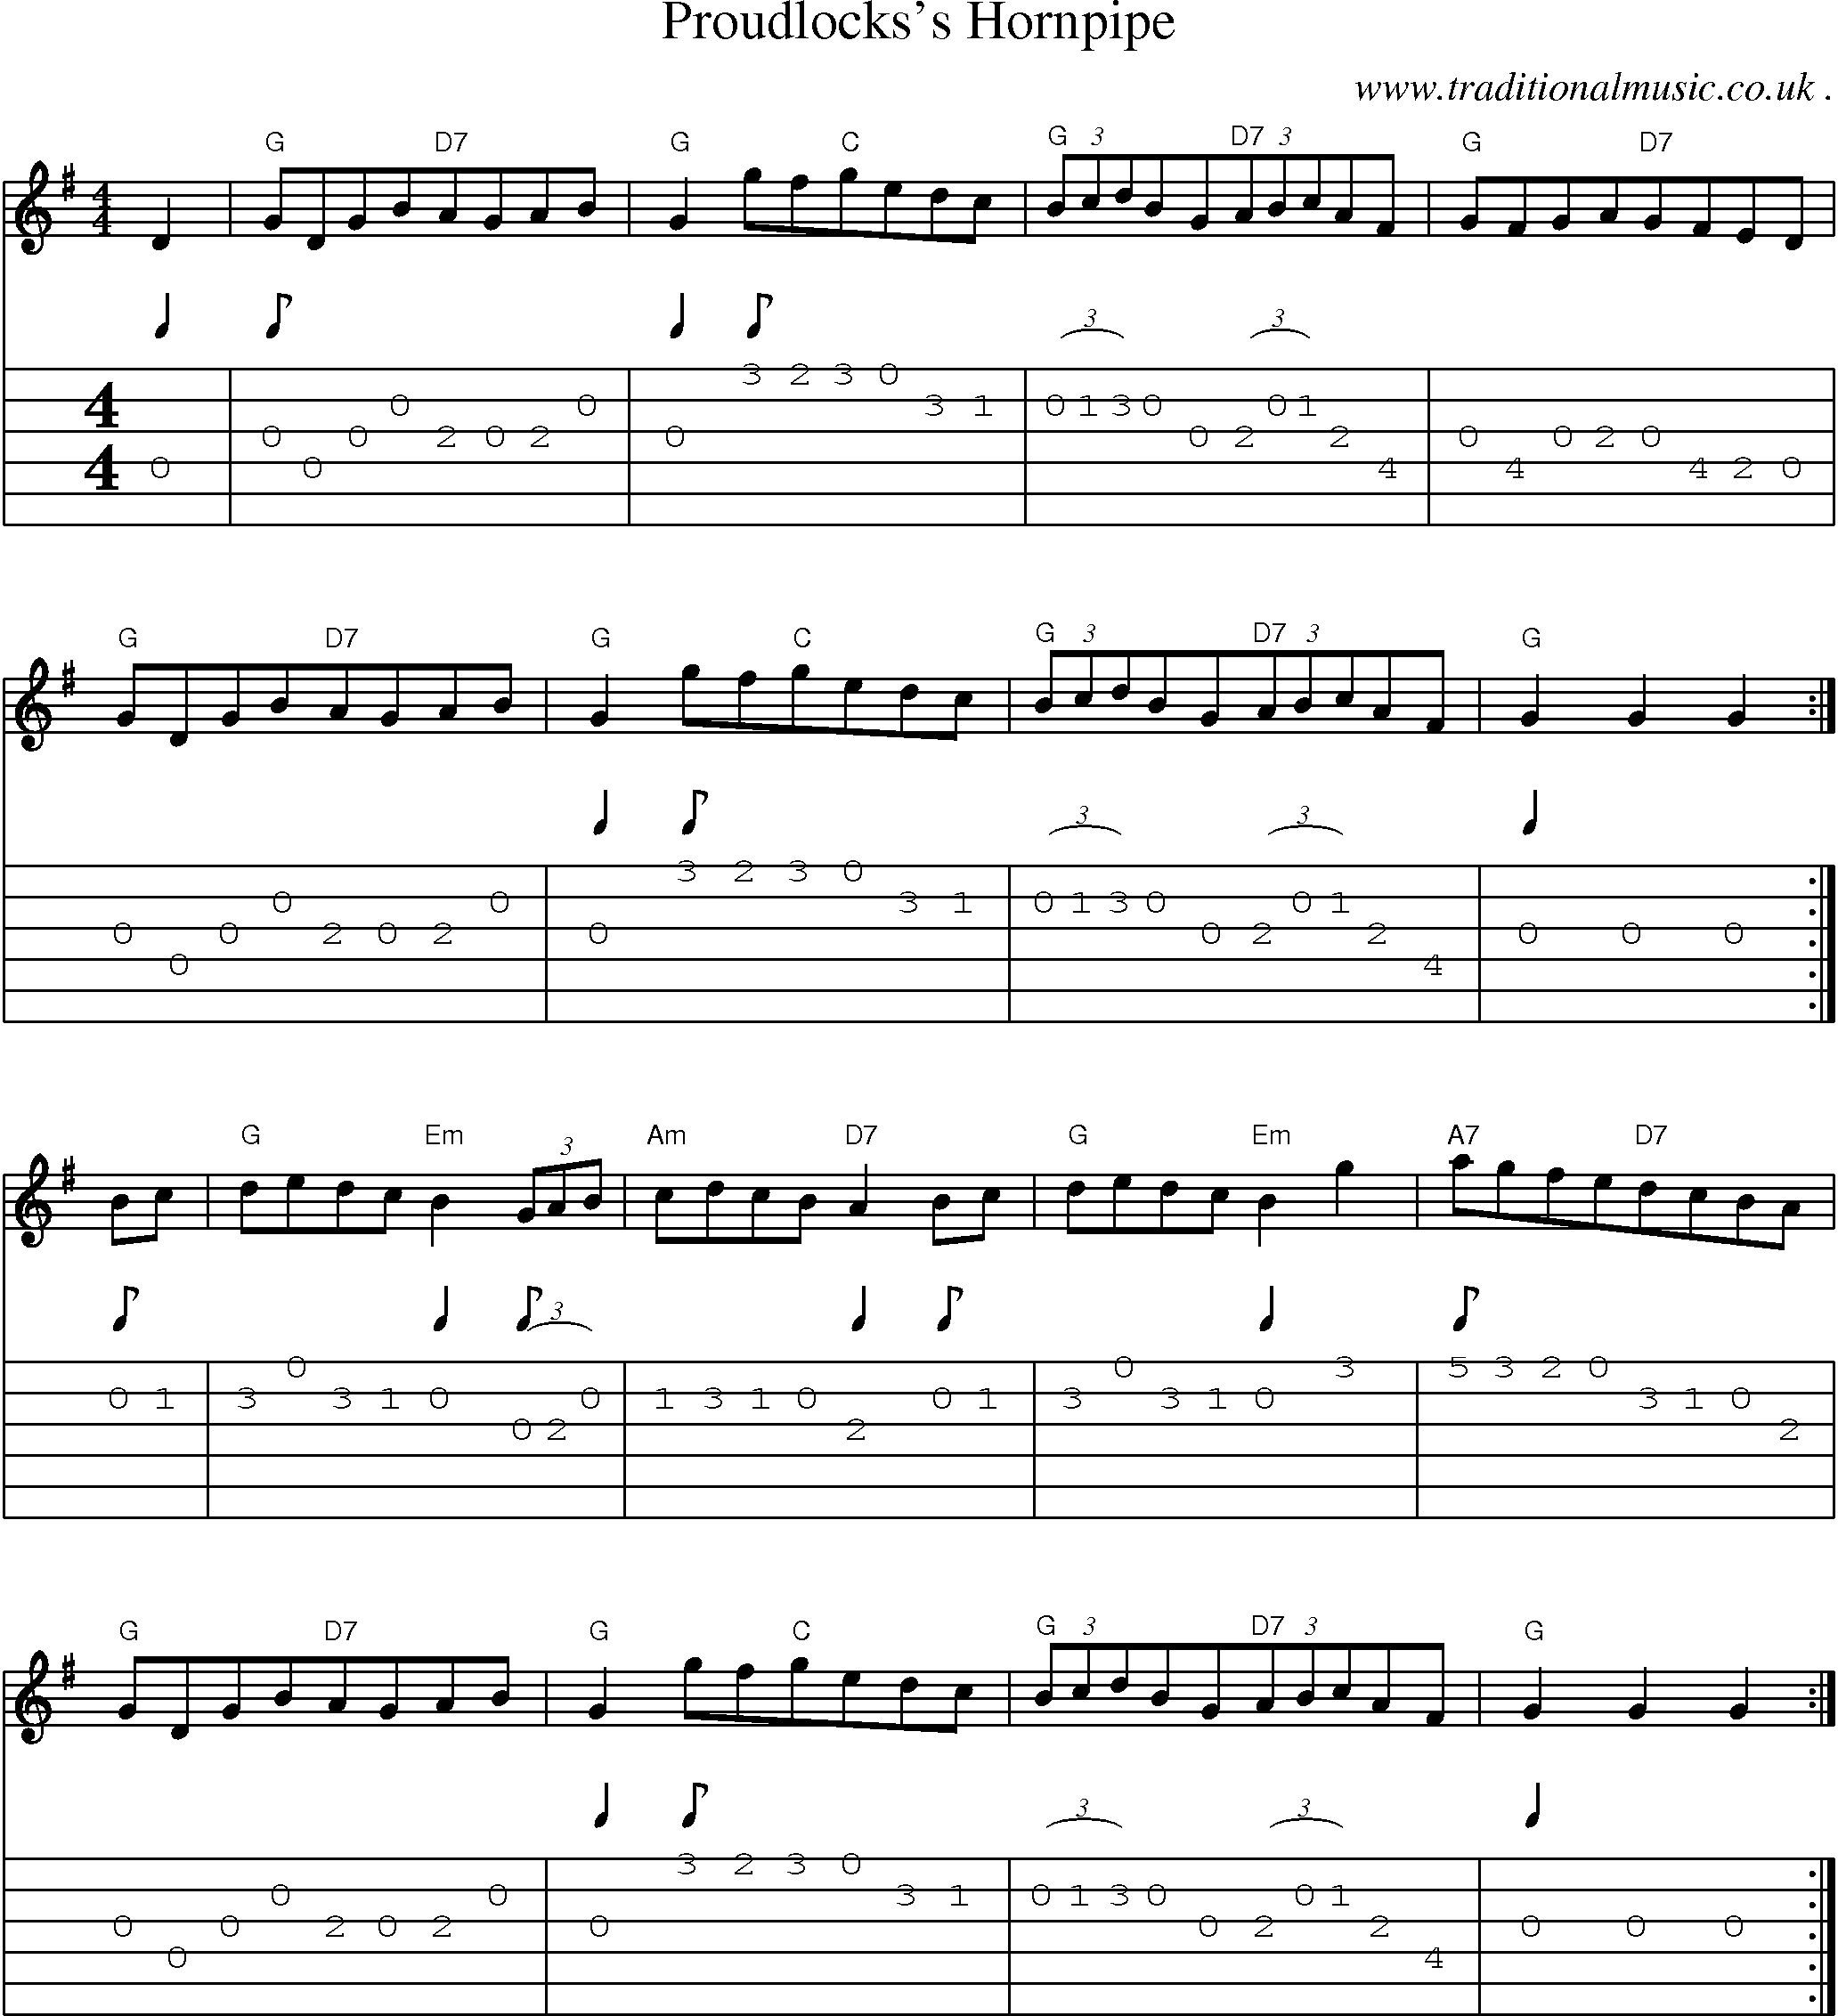 Sheet-Music and Guitar Tabs for Proudlockss Hornpipe